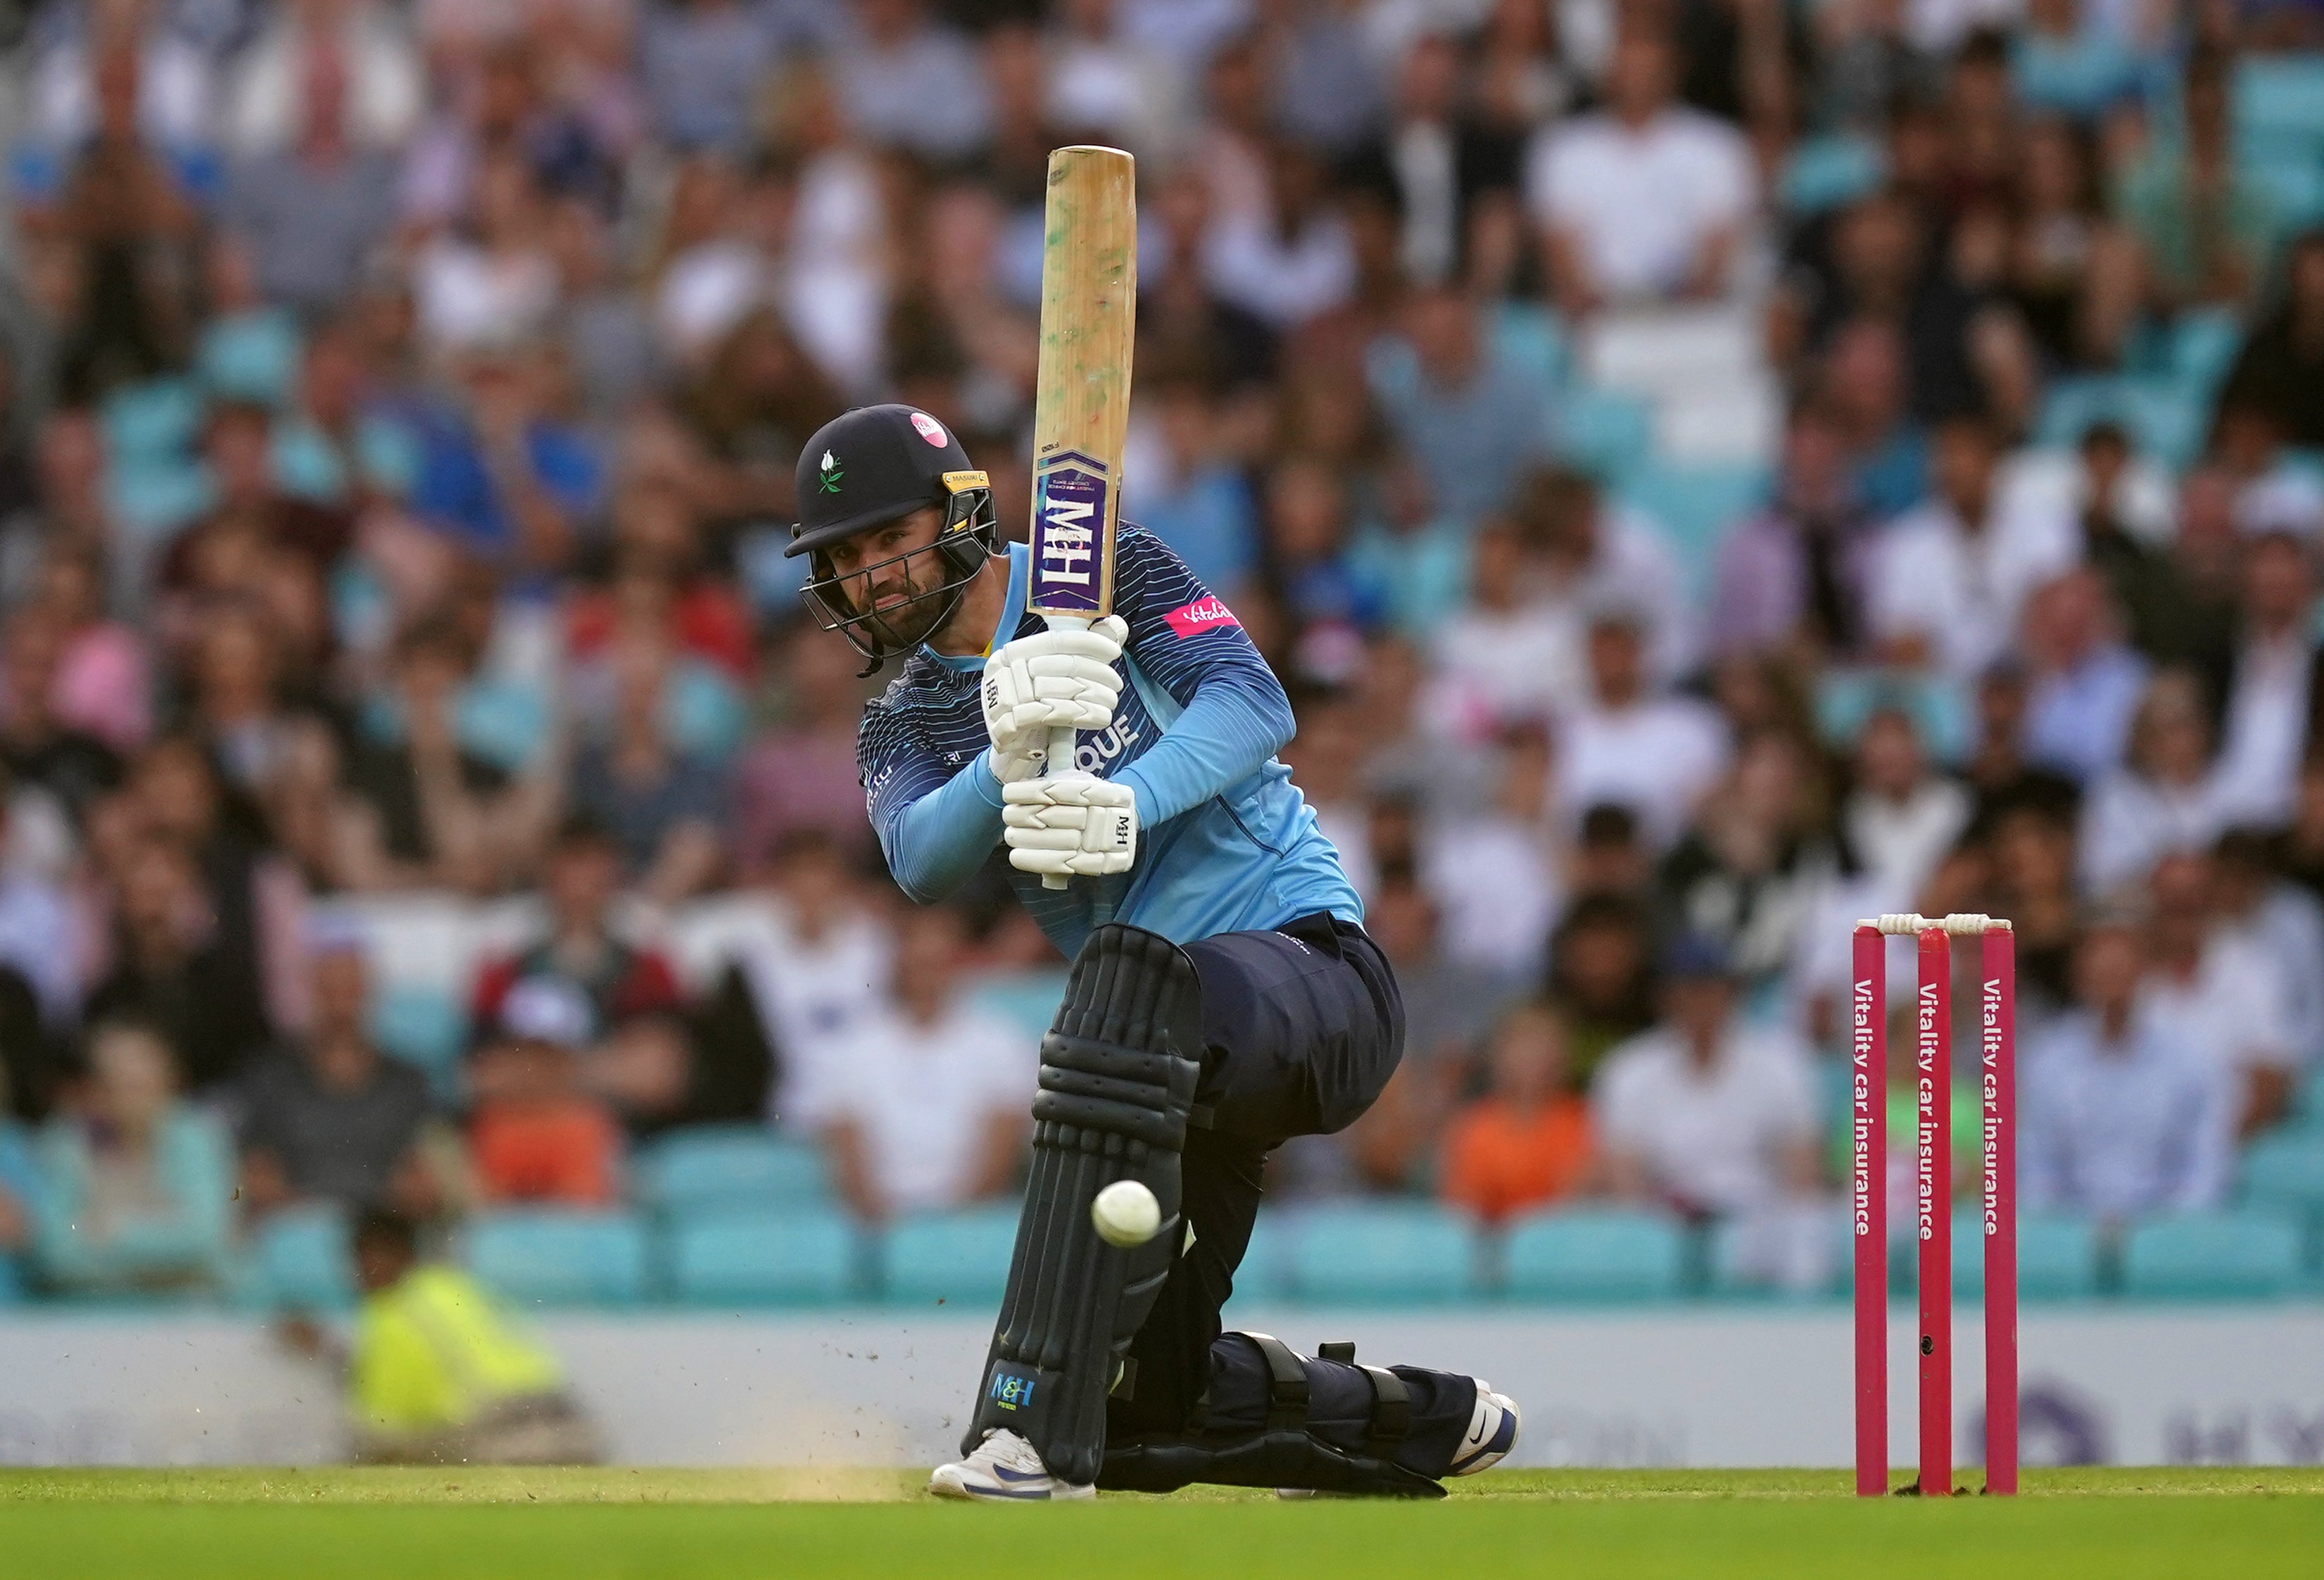 Yorkshire’s Will Fraine hit 143 in the victory over Northamptonshire (Mike Egerton/PA)